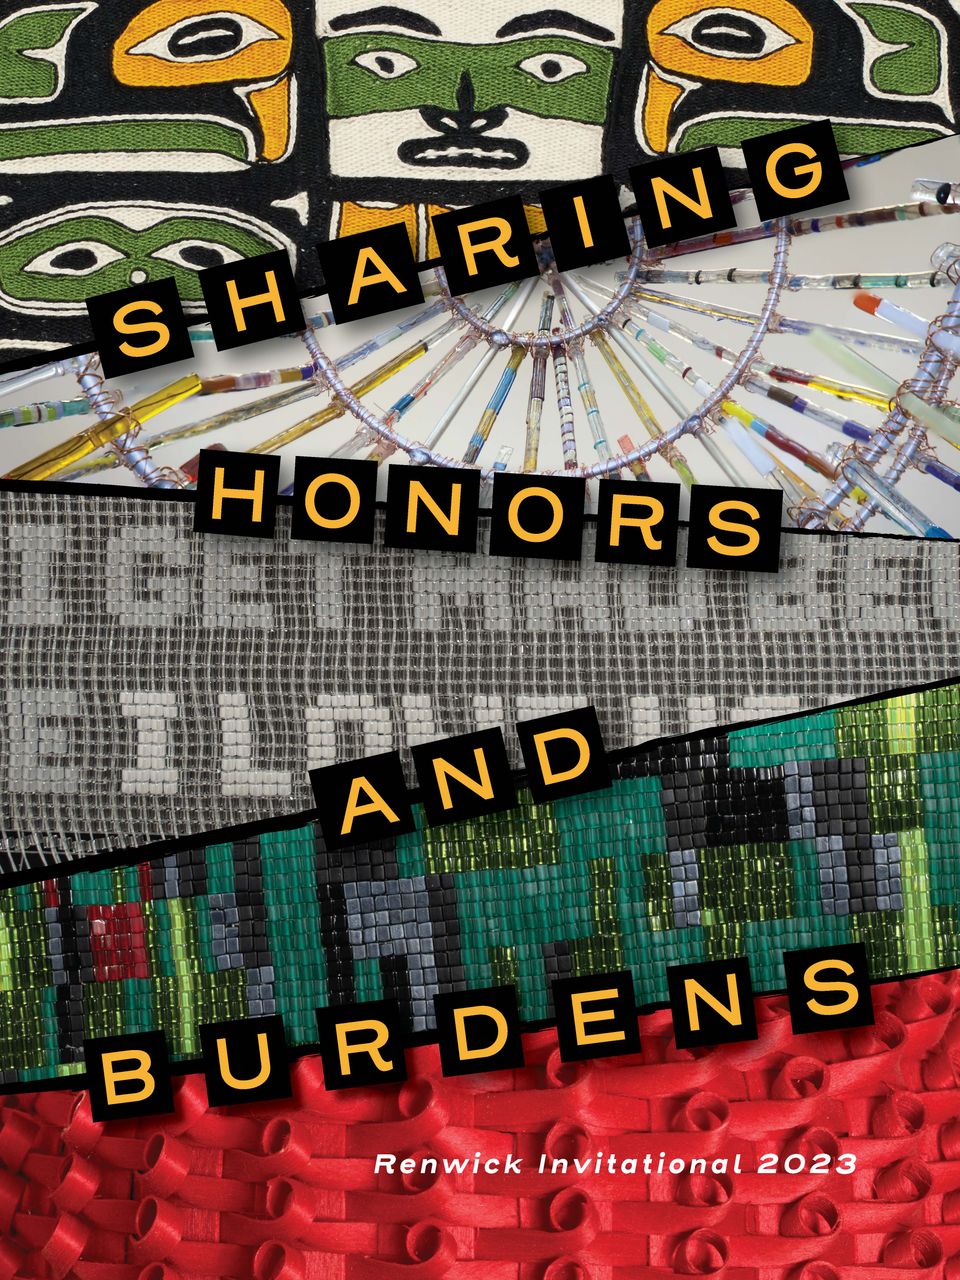 A cover for the Sharing Honors and Burdens publication